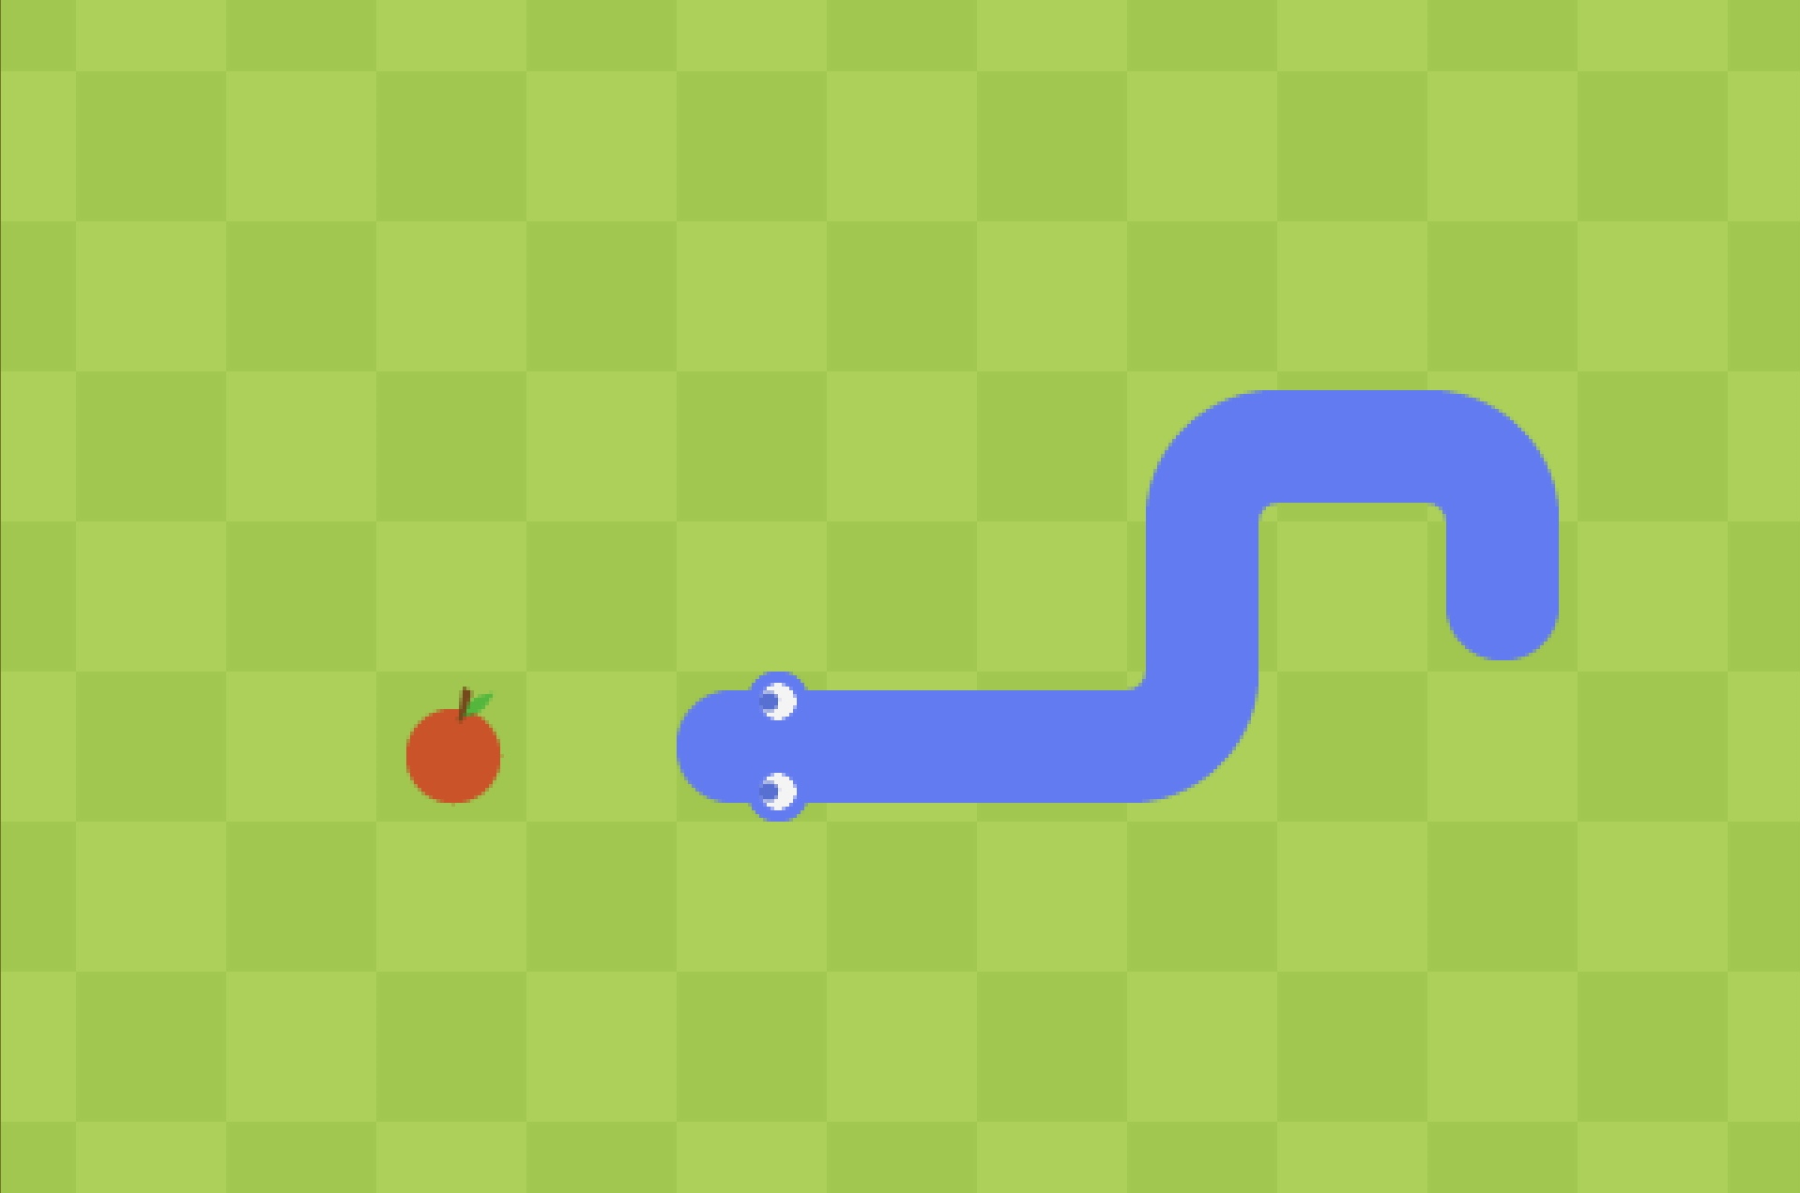 snake games classic on google